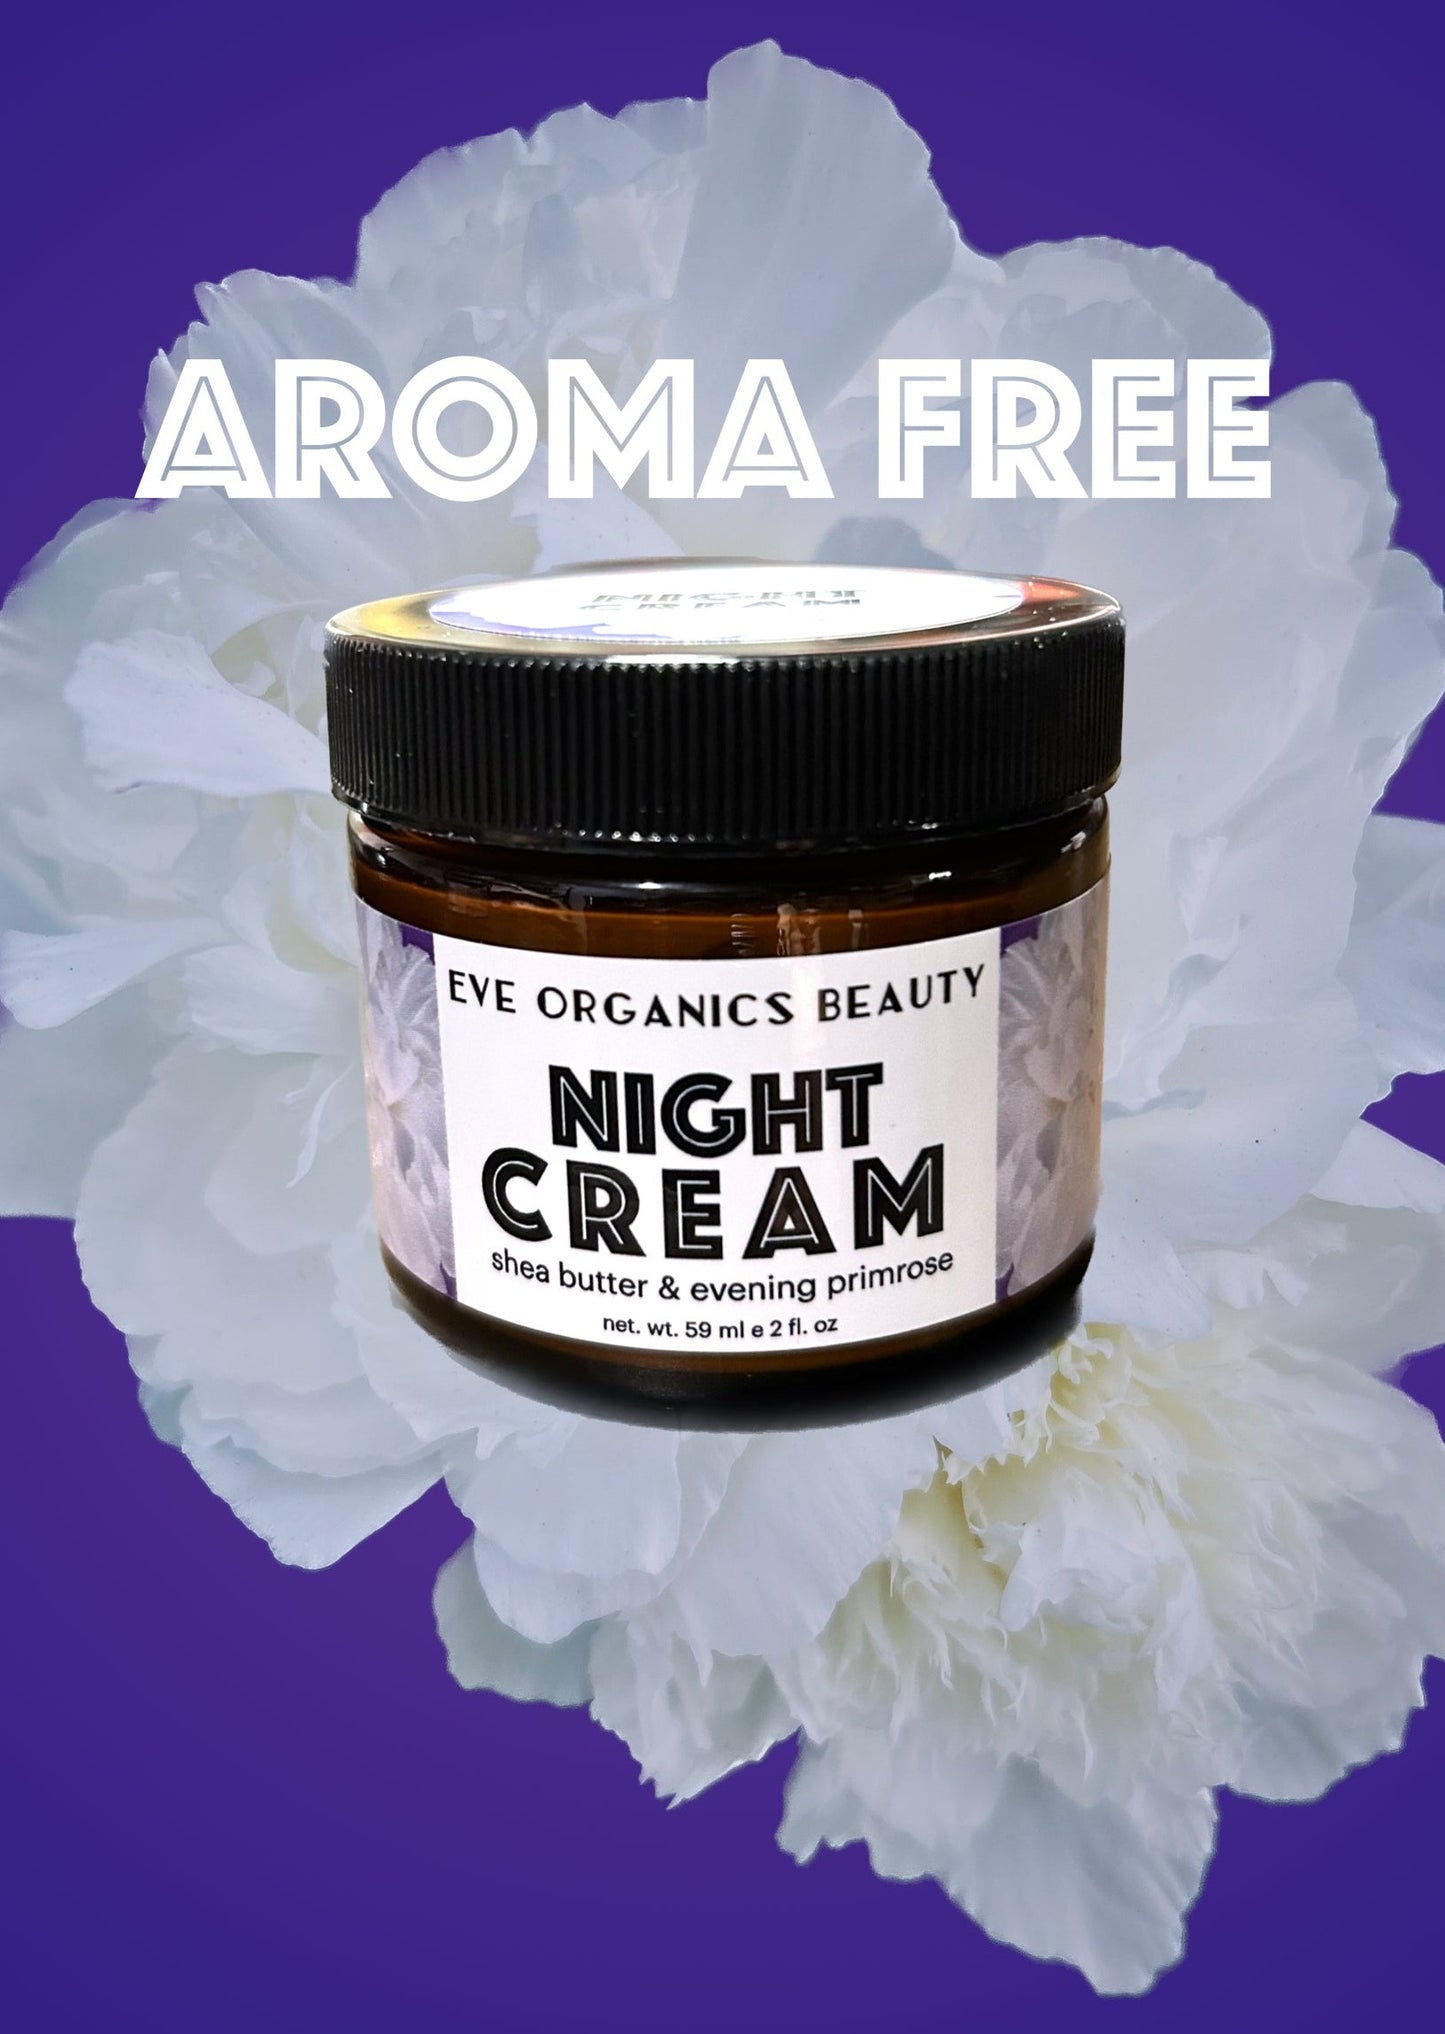 FULL SIZE AROMA FREE NIGHT CREAM WITH SHEA BUTTER & EVENING PRIMROSE